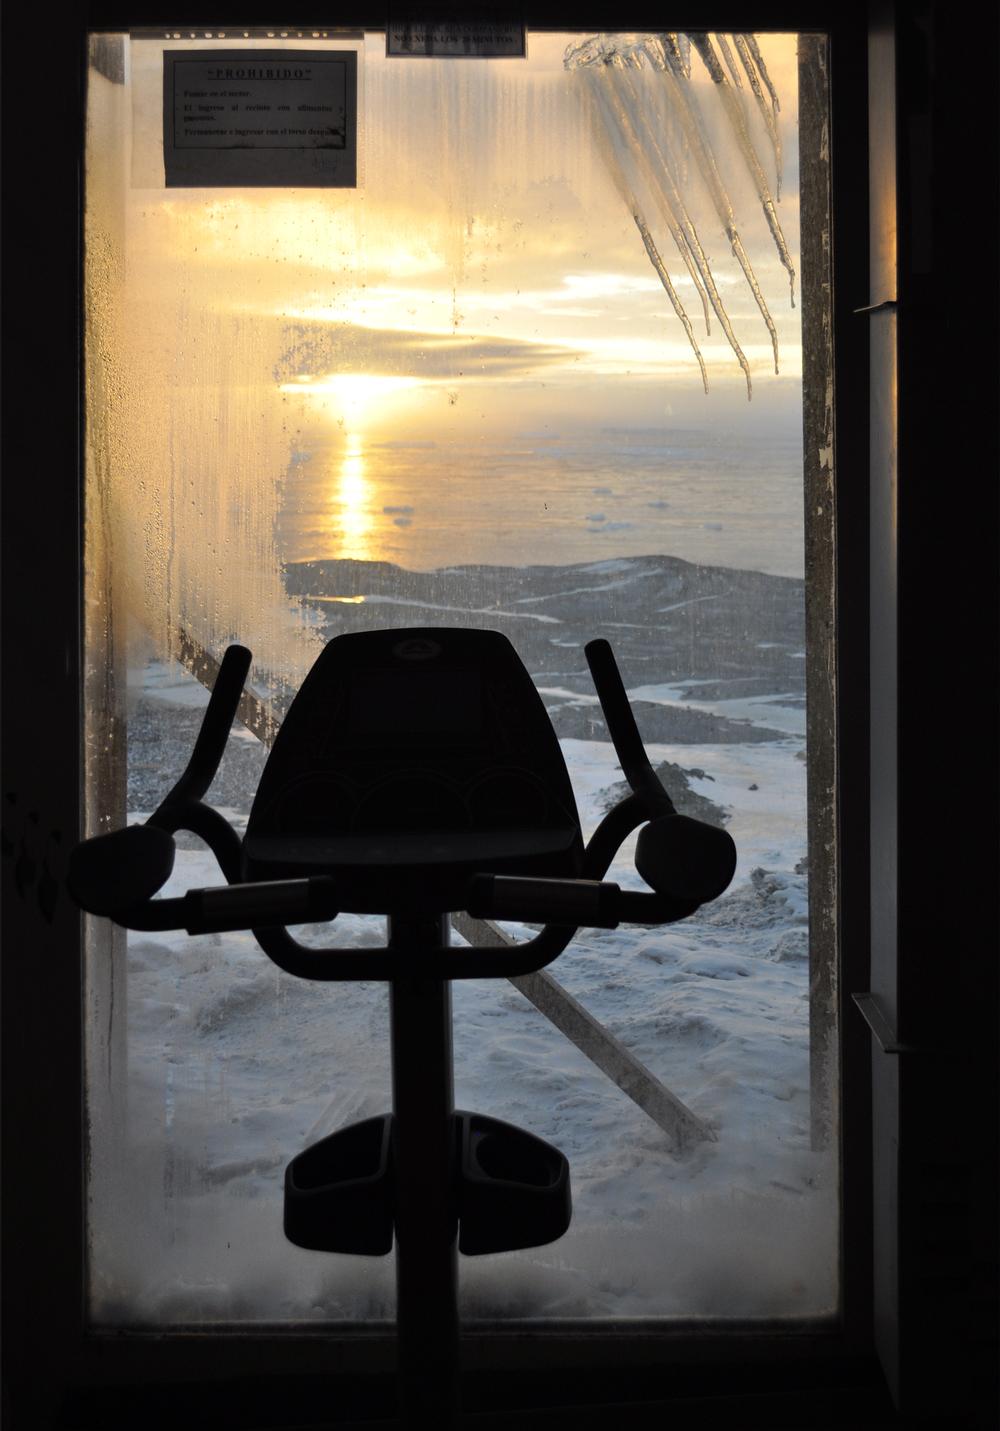 The gym offers jaw-dropping views over the Southern Ocean